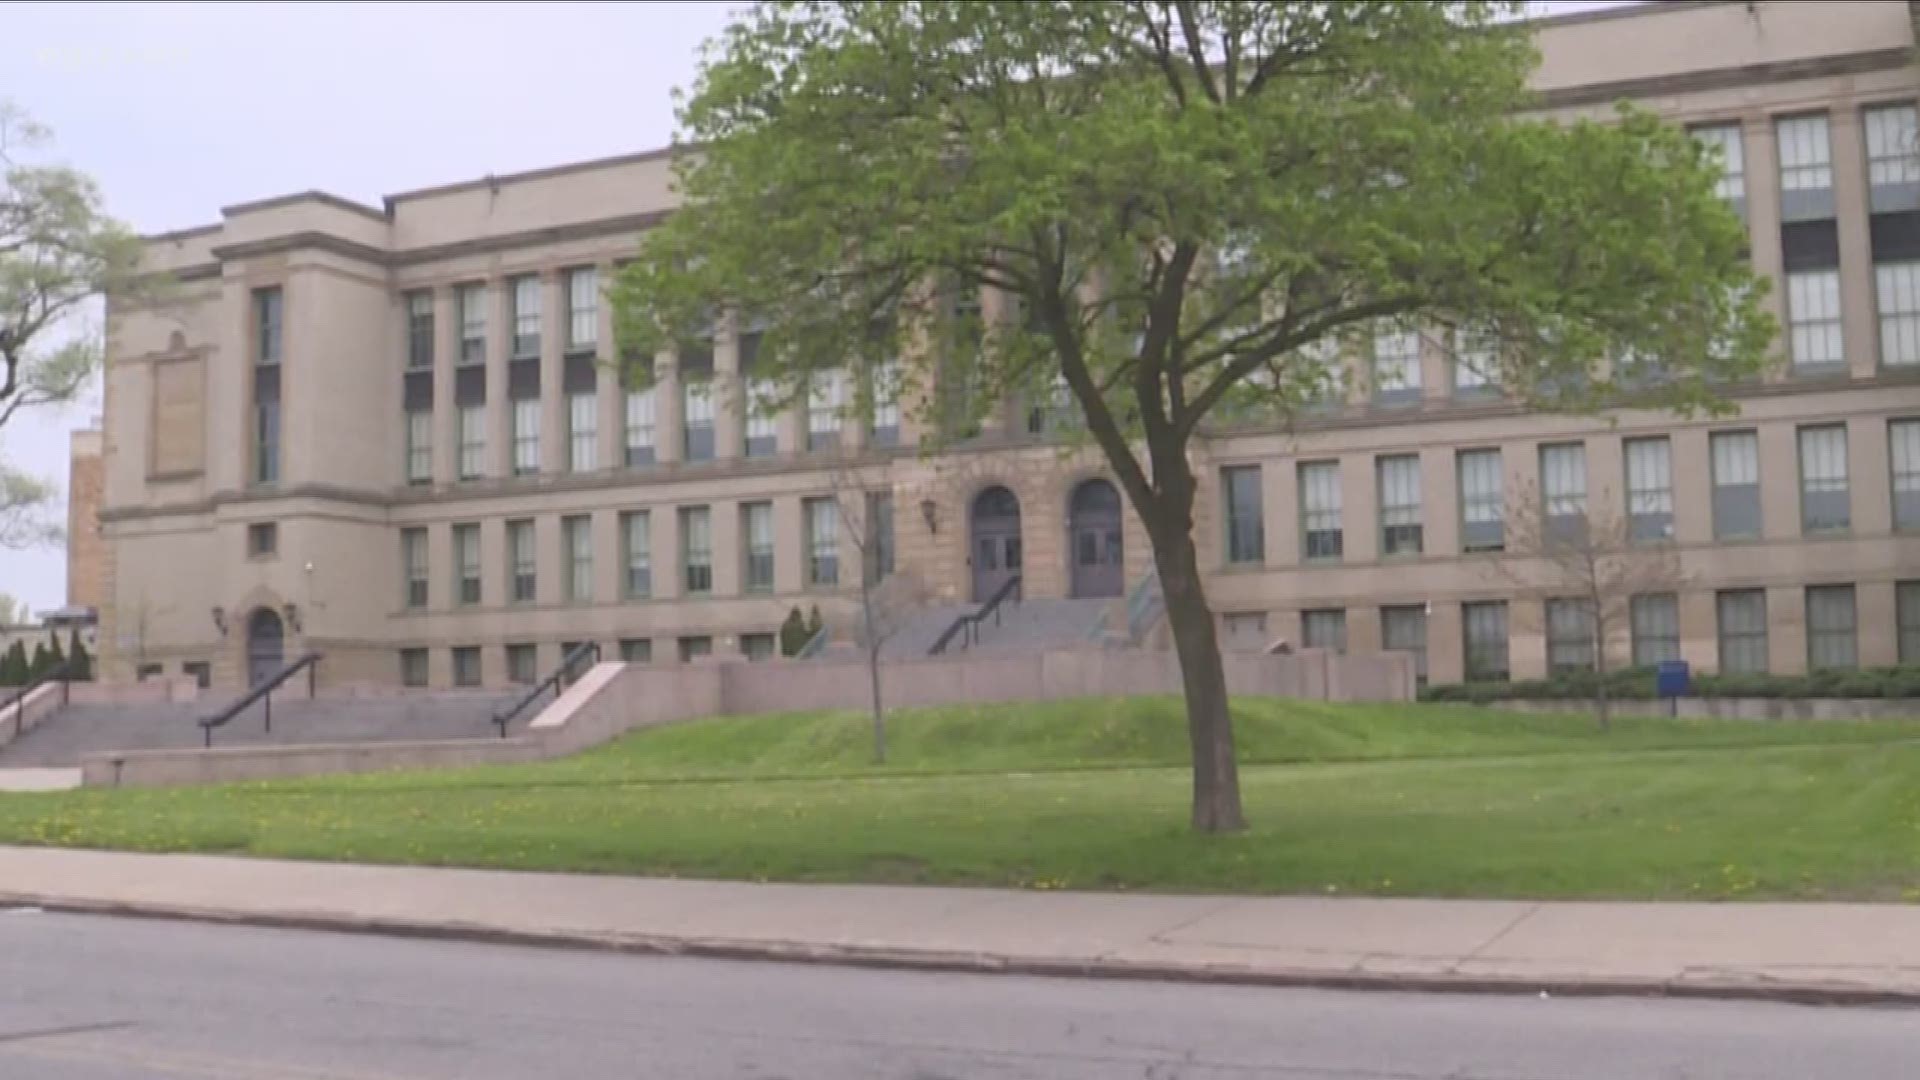 Buffalo common council member Ulysses Wingo is apologizing for bringing a gun to Riverside High school.